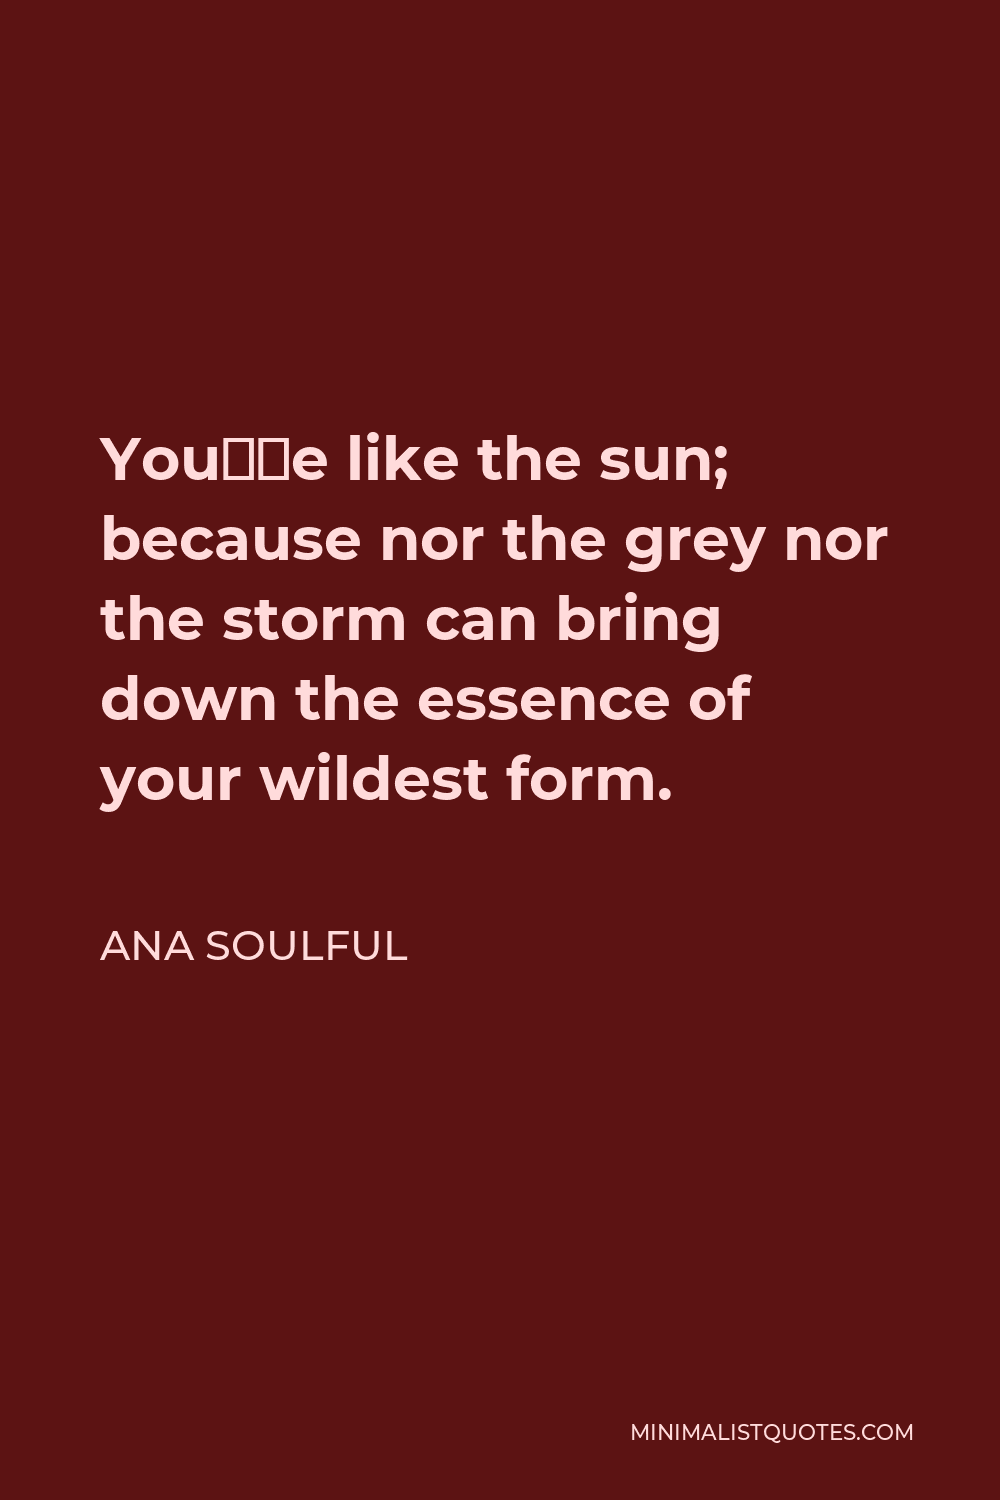 Ana Soulful Quote - You’re like the sun; because nor the grey nor the storm, can bring down the essence of your wildest form.